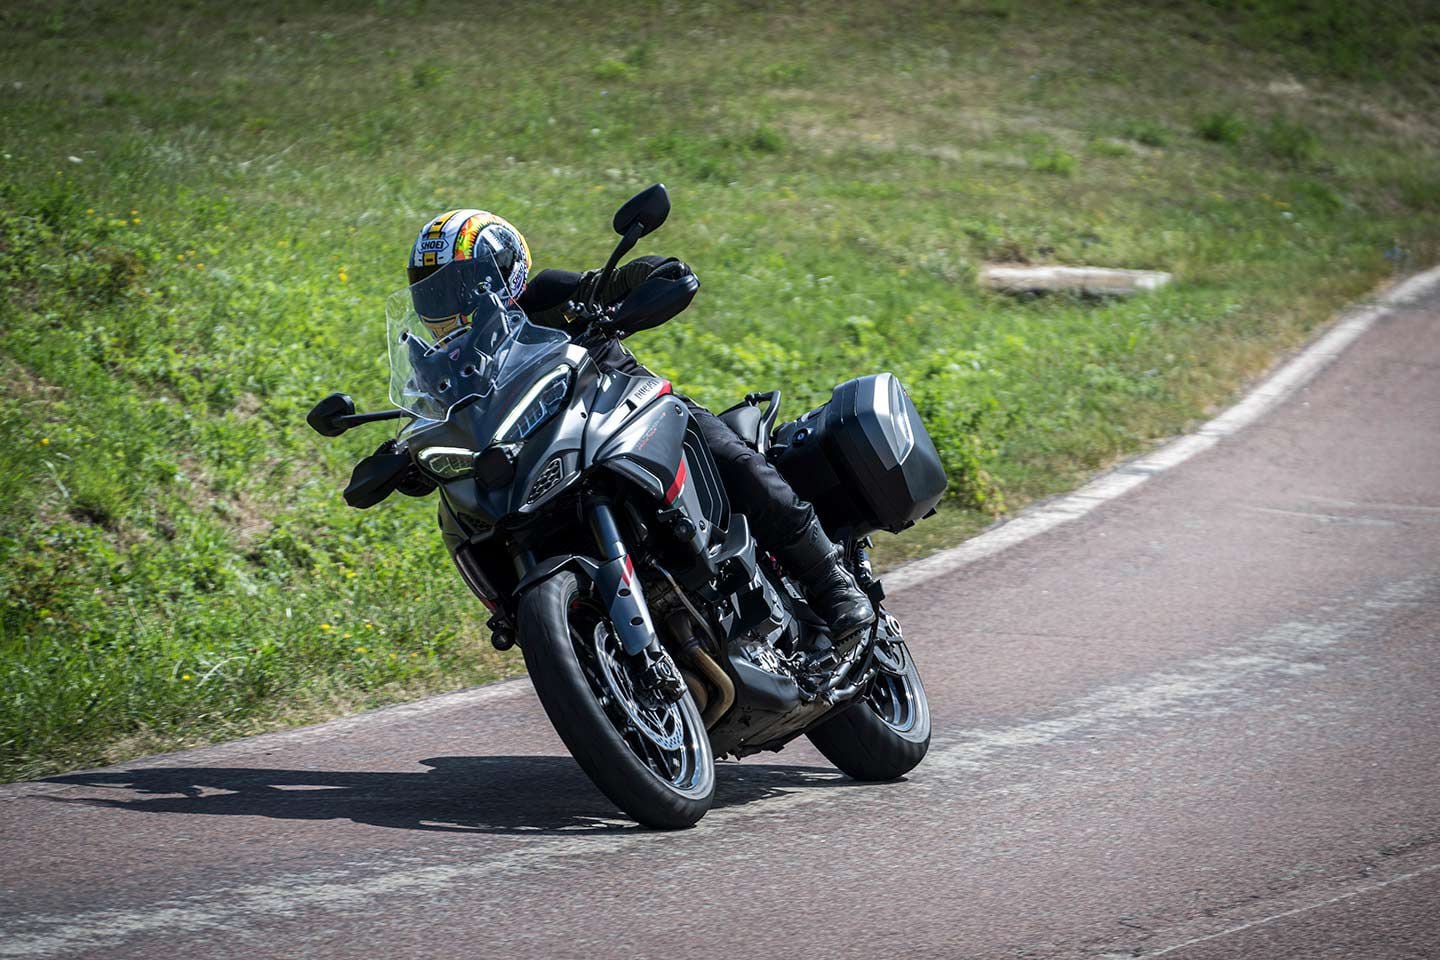 Lean-sensitive traction control and ABS along with Ducati’s Skyhook semi-active suspension keep rider confidence high when the road quality is low.